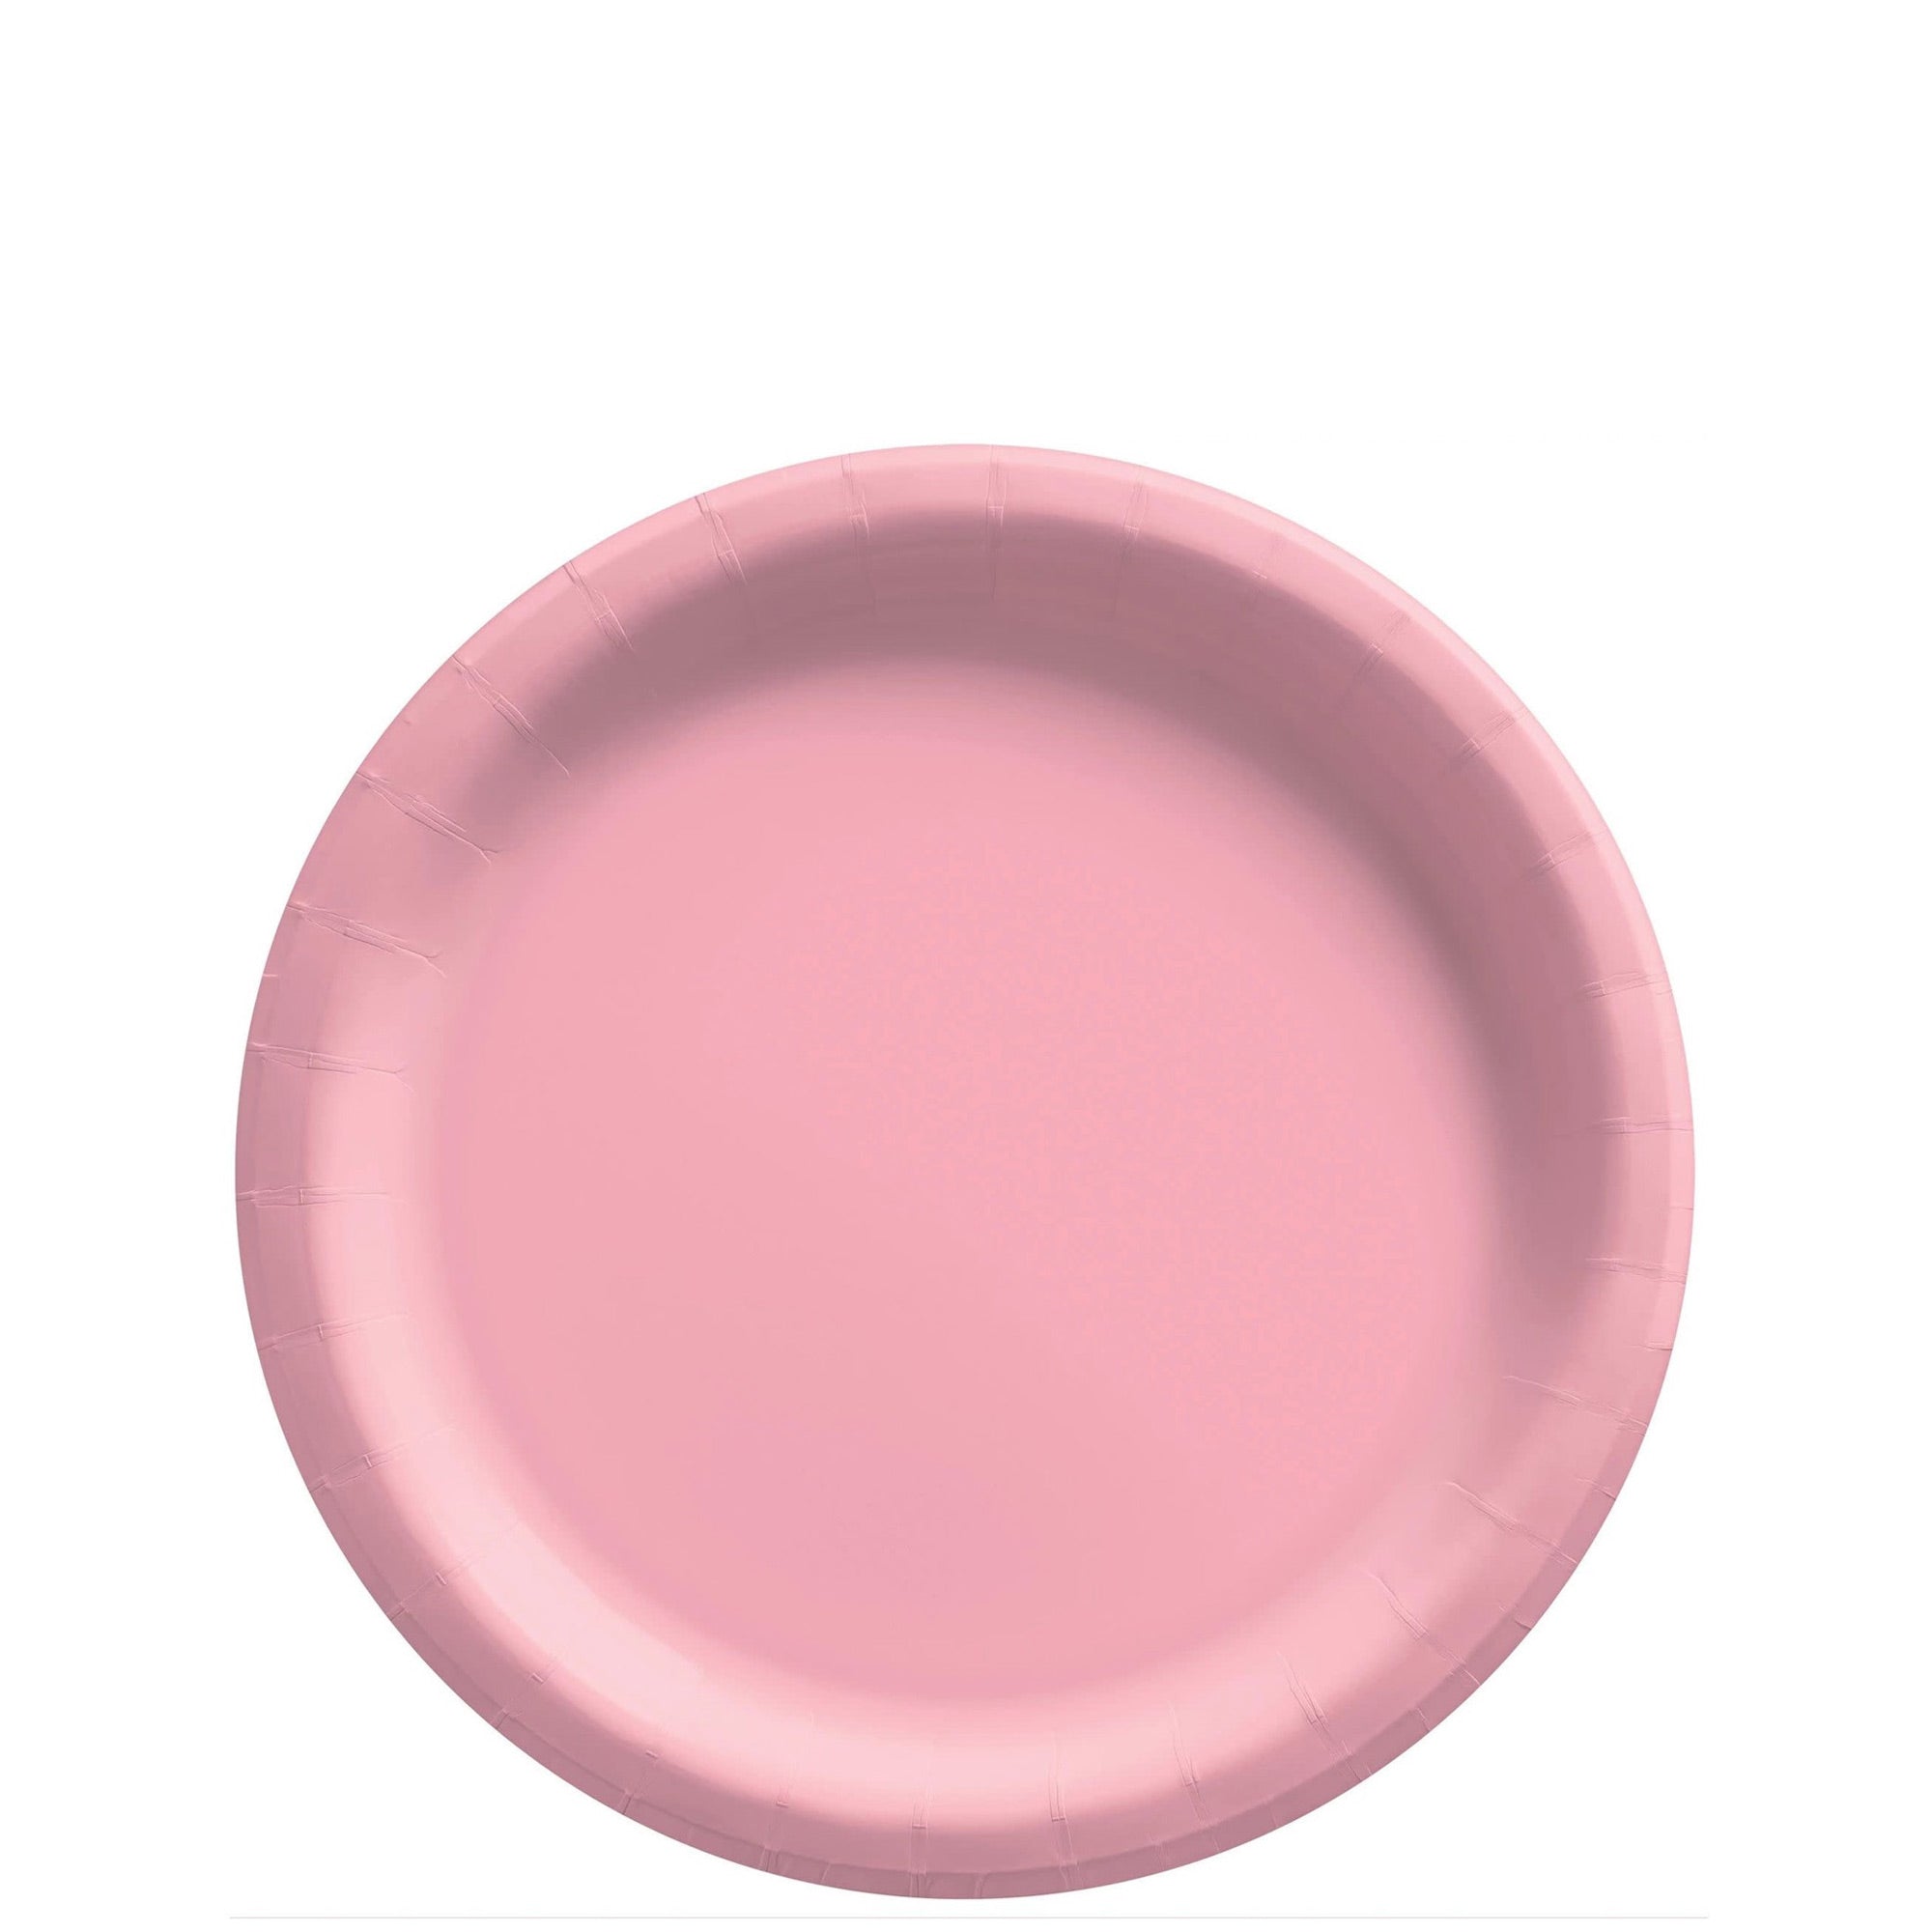 New Pink Round Paper Plates 6.75in, 20pcs